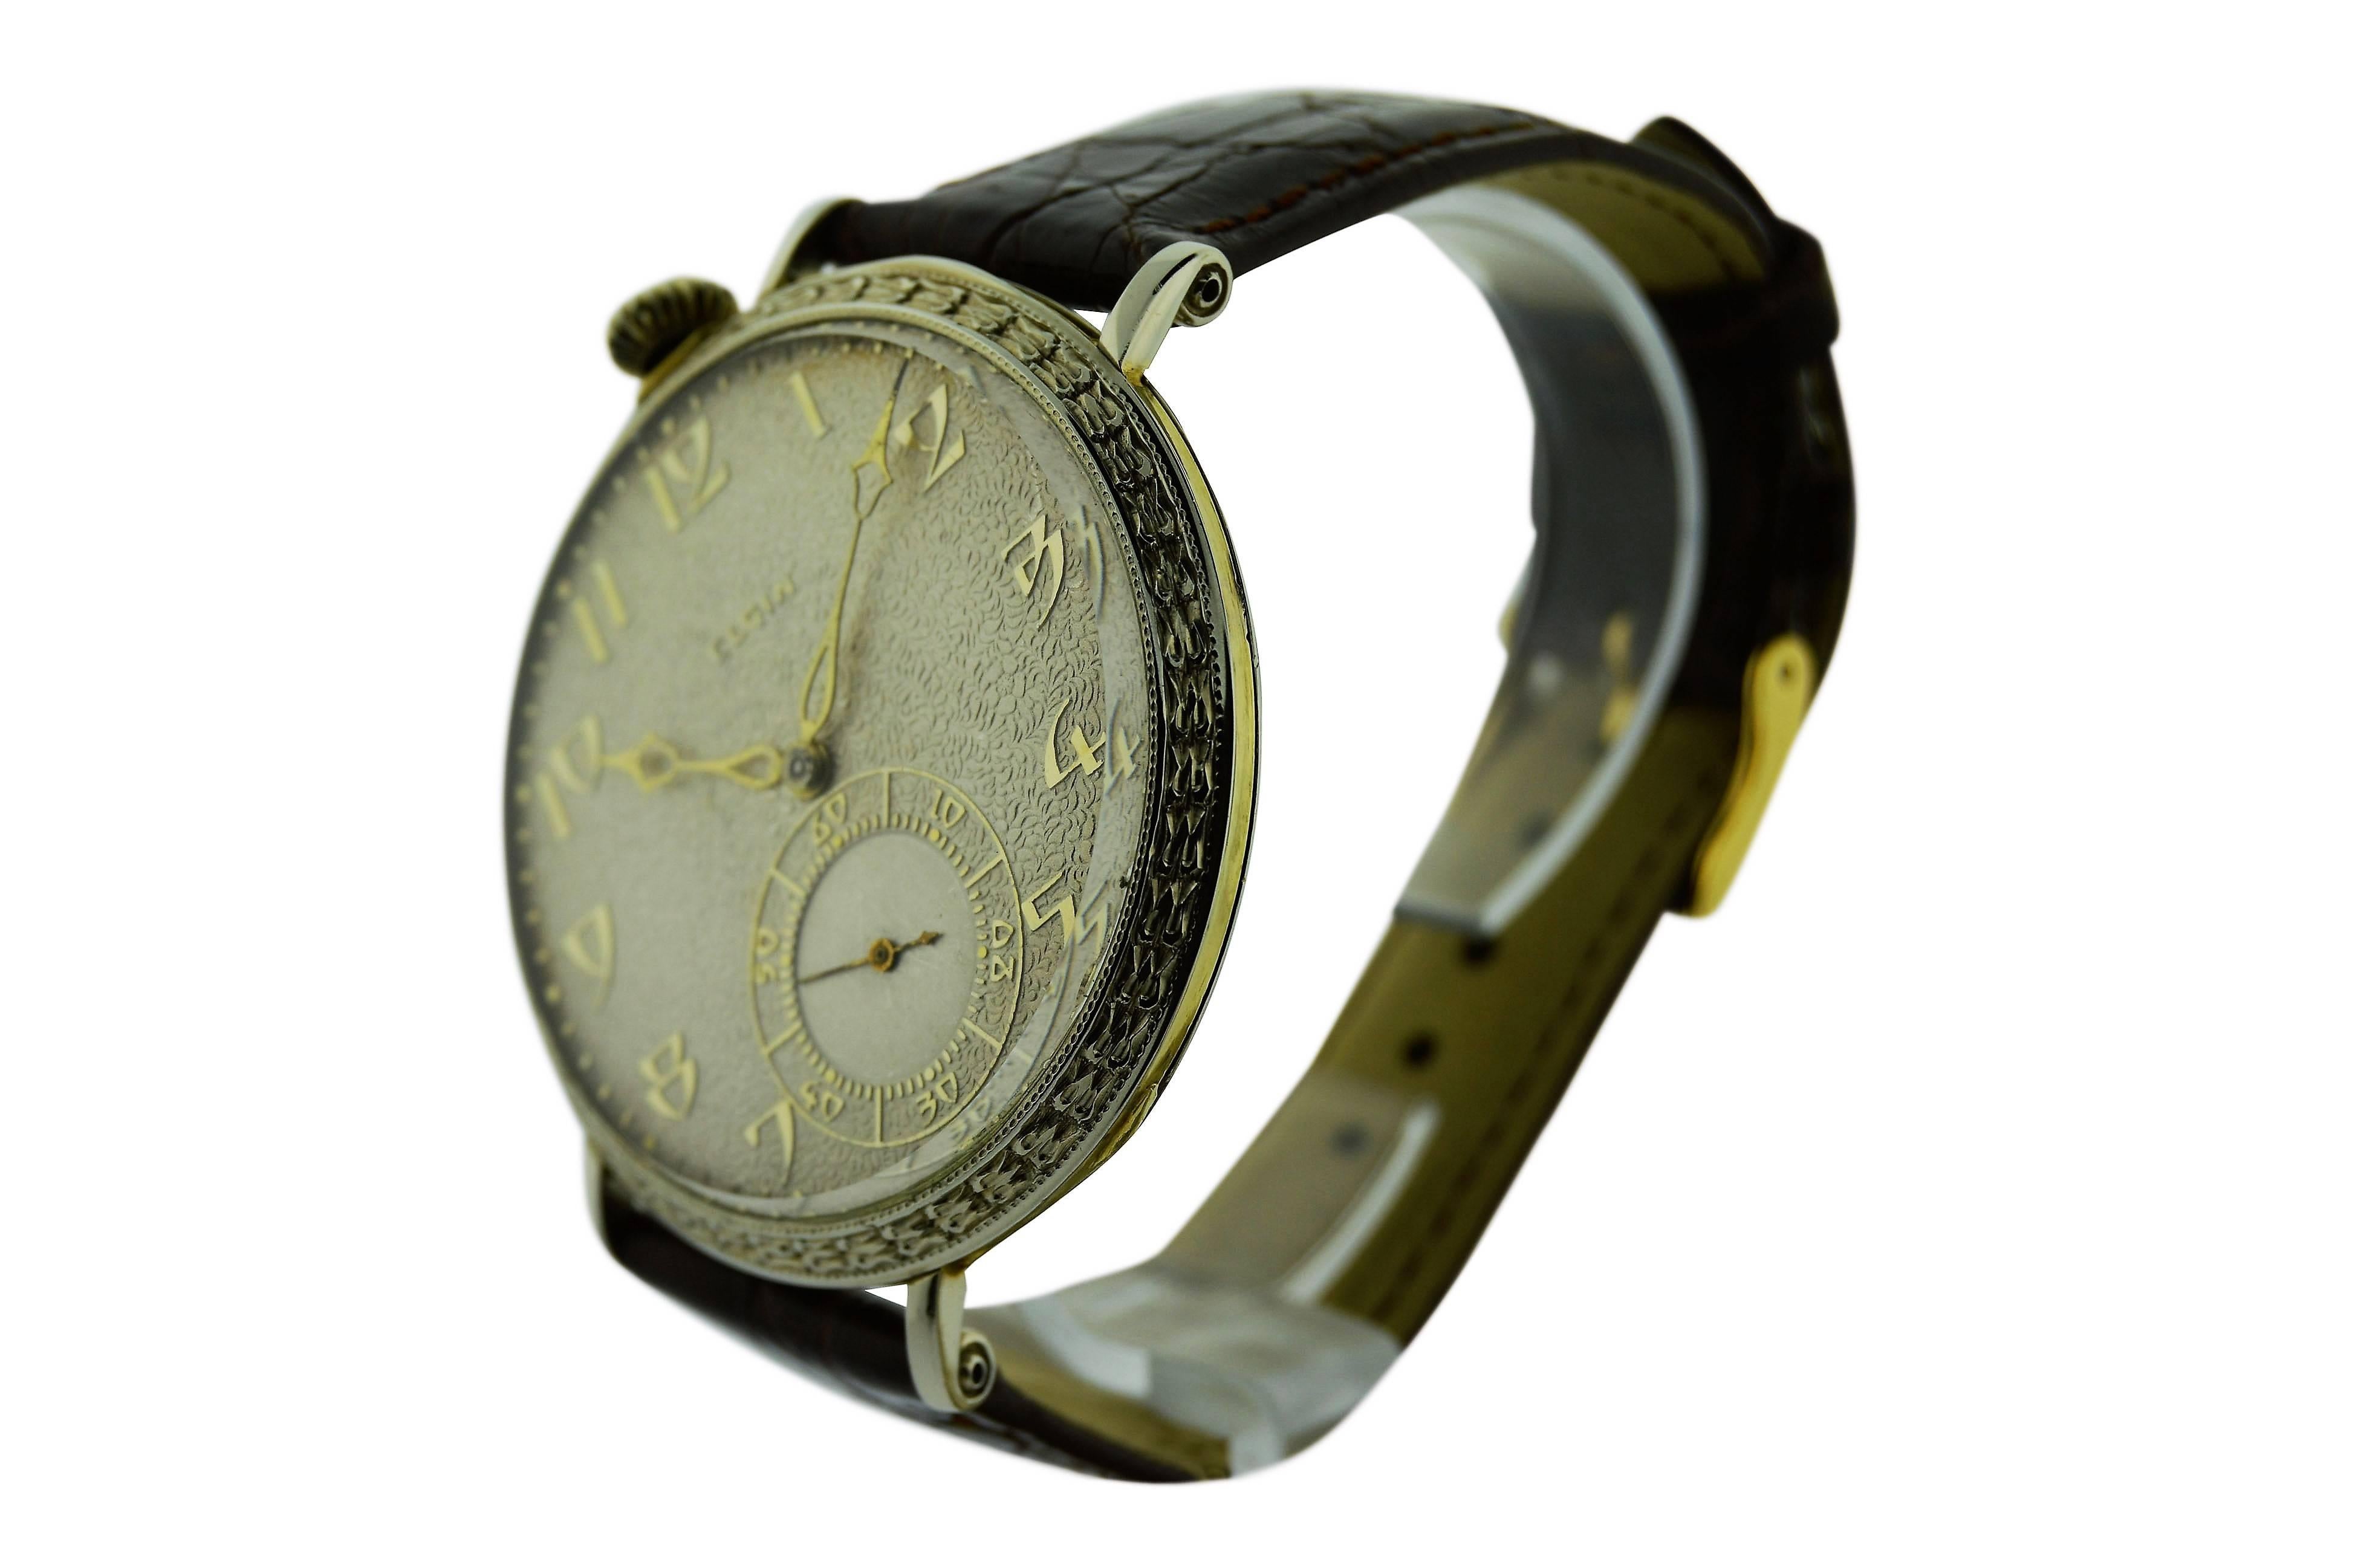 FACTORY / HOUSE: Elgin Watch Company 
STYLE / REFERENCE: Pocket / Right Hand Drivers Wrist Watch
METAL / MATERIAL: 14Kt. Solid Gold, Yellow and White Gold
DIMENSIONS:  49mm  X  44mm
CIRCA: 1920's 
MOVEMENT / CALIBER: 21 Jewels / High Grade Hand Made